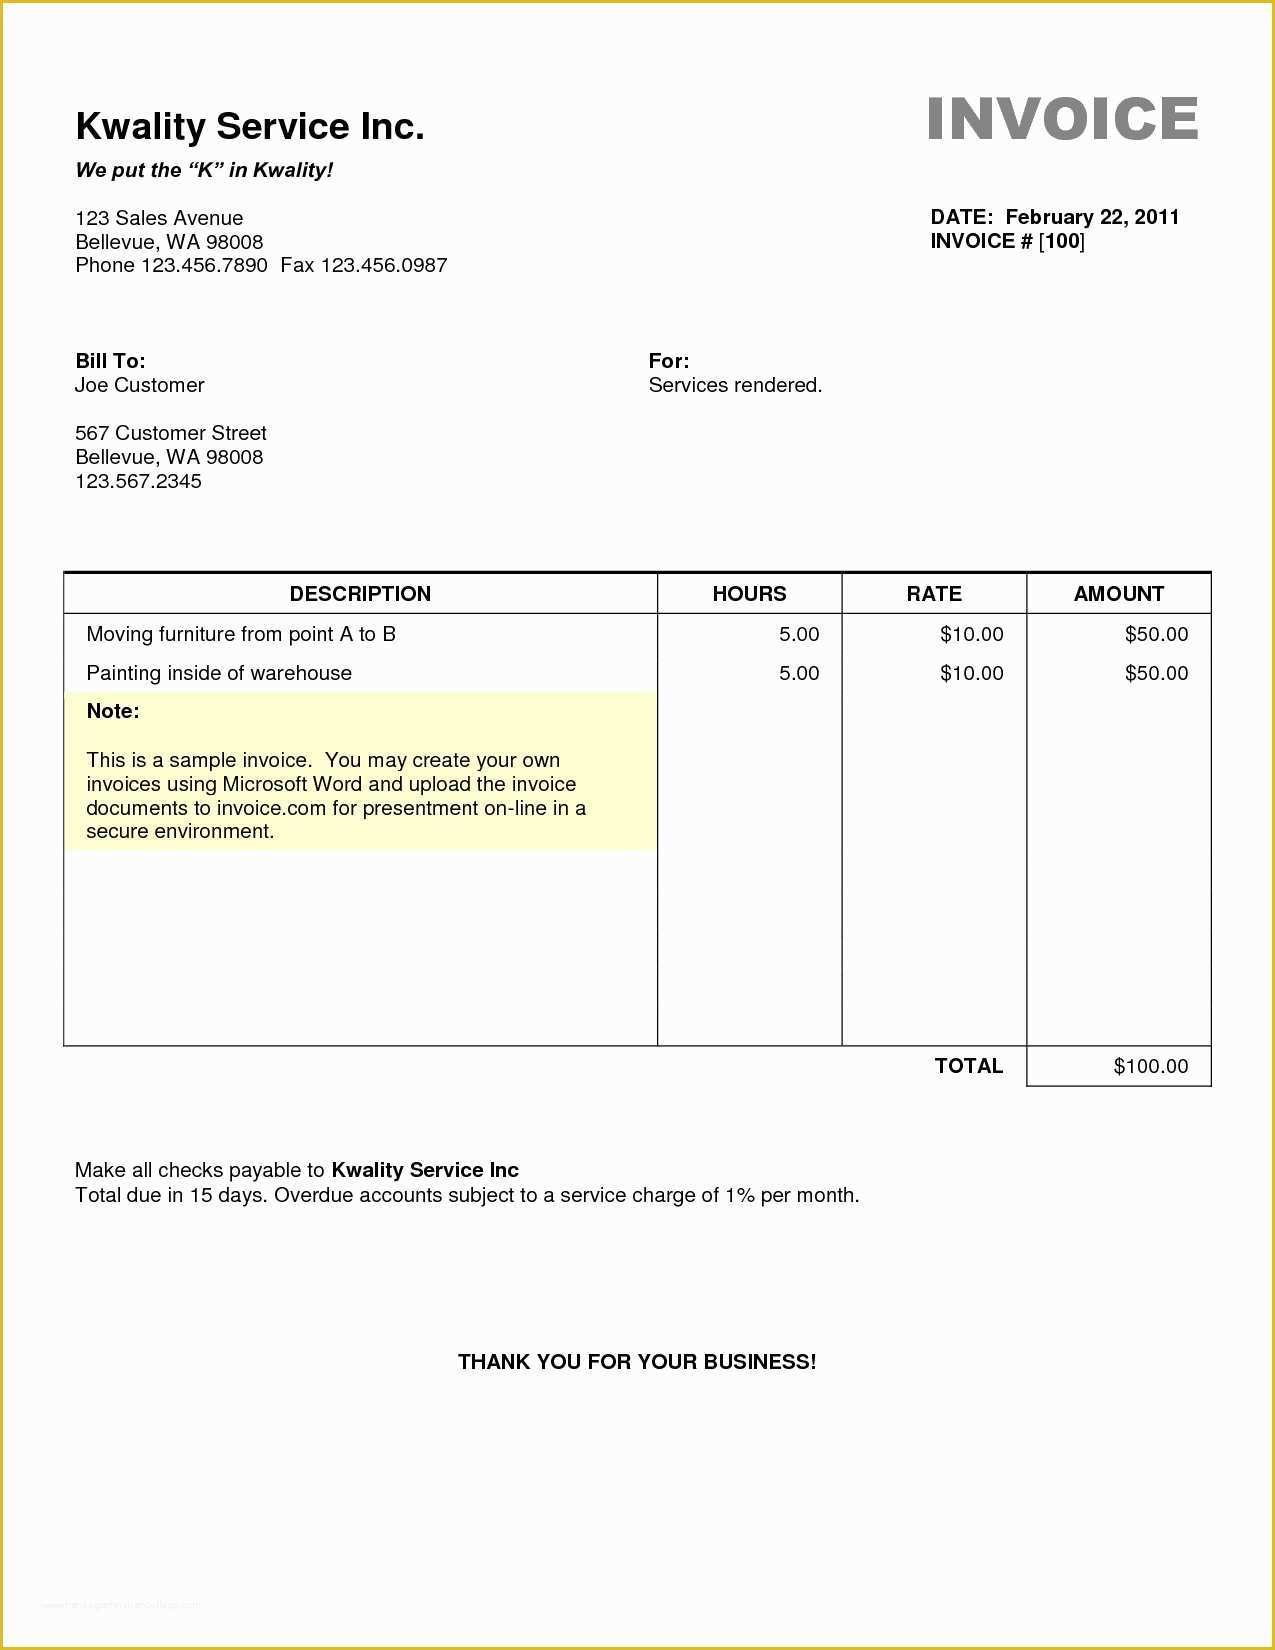 Free Invoice Template for Word 2010 Of Invoice Template Word 2010 Awesome Collection Invoice